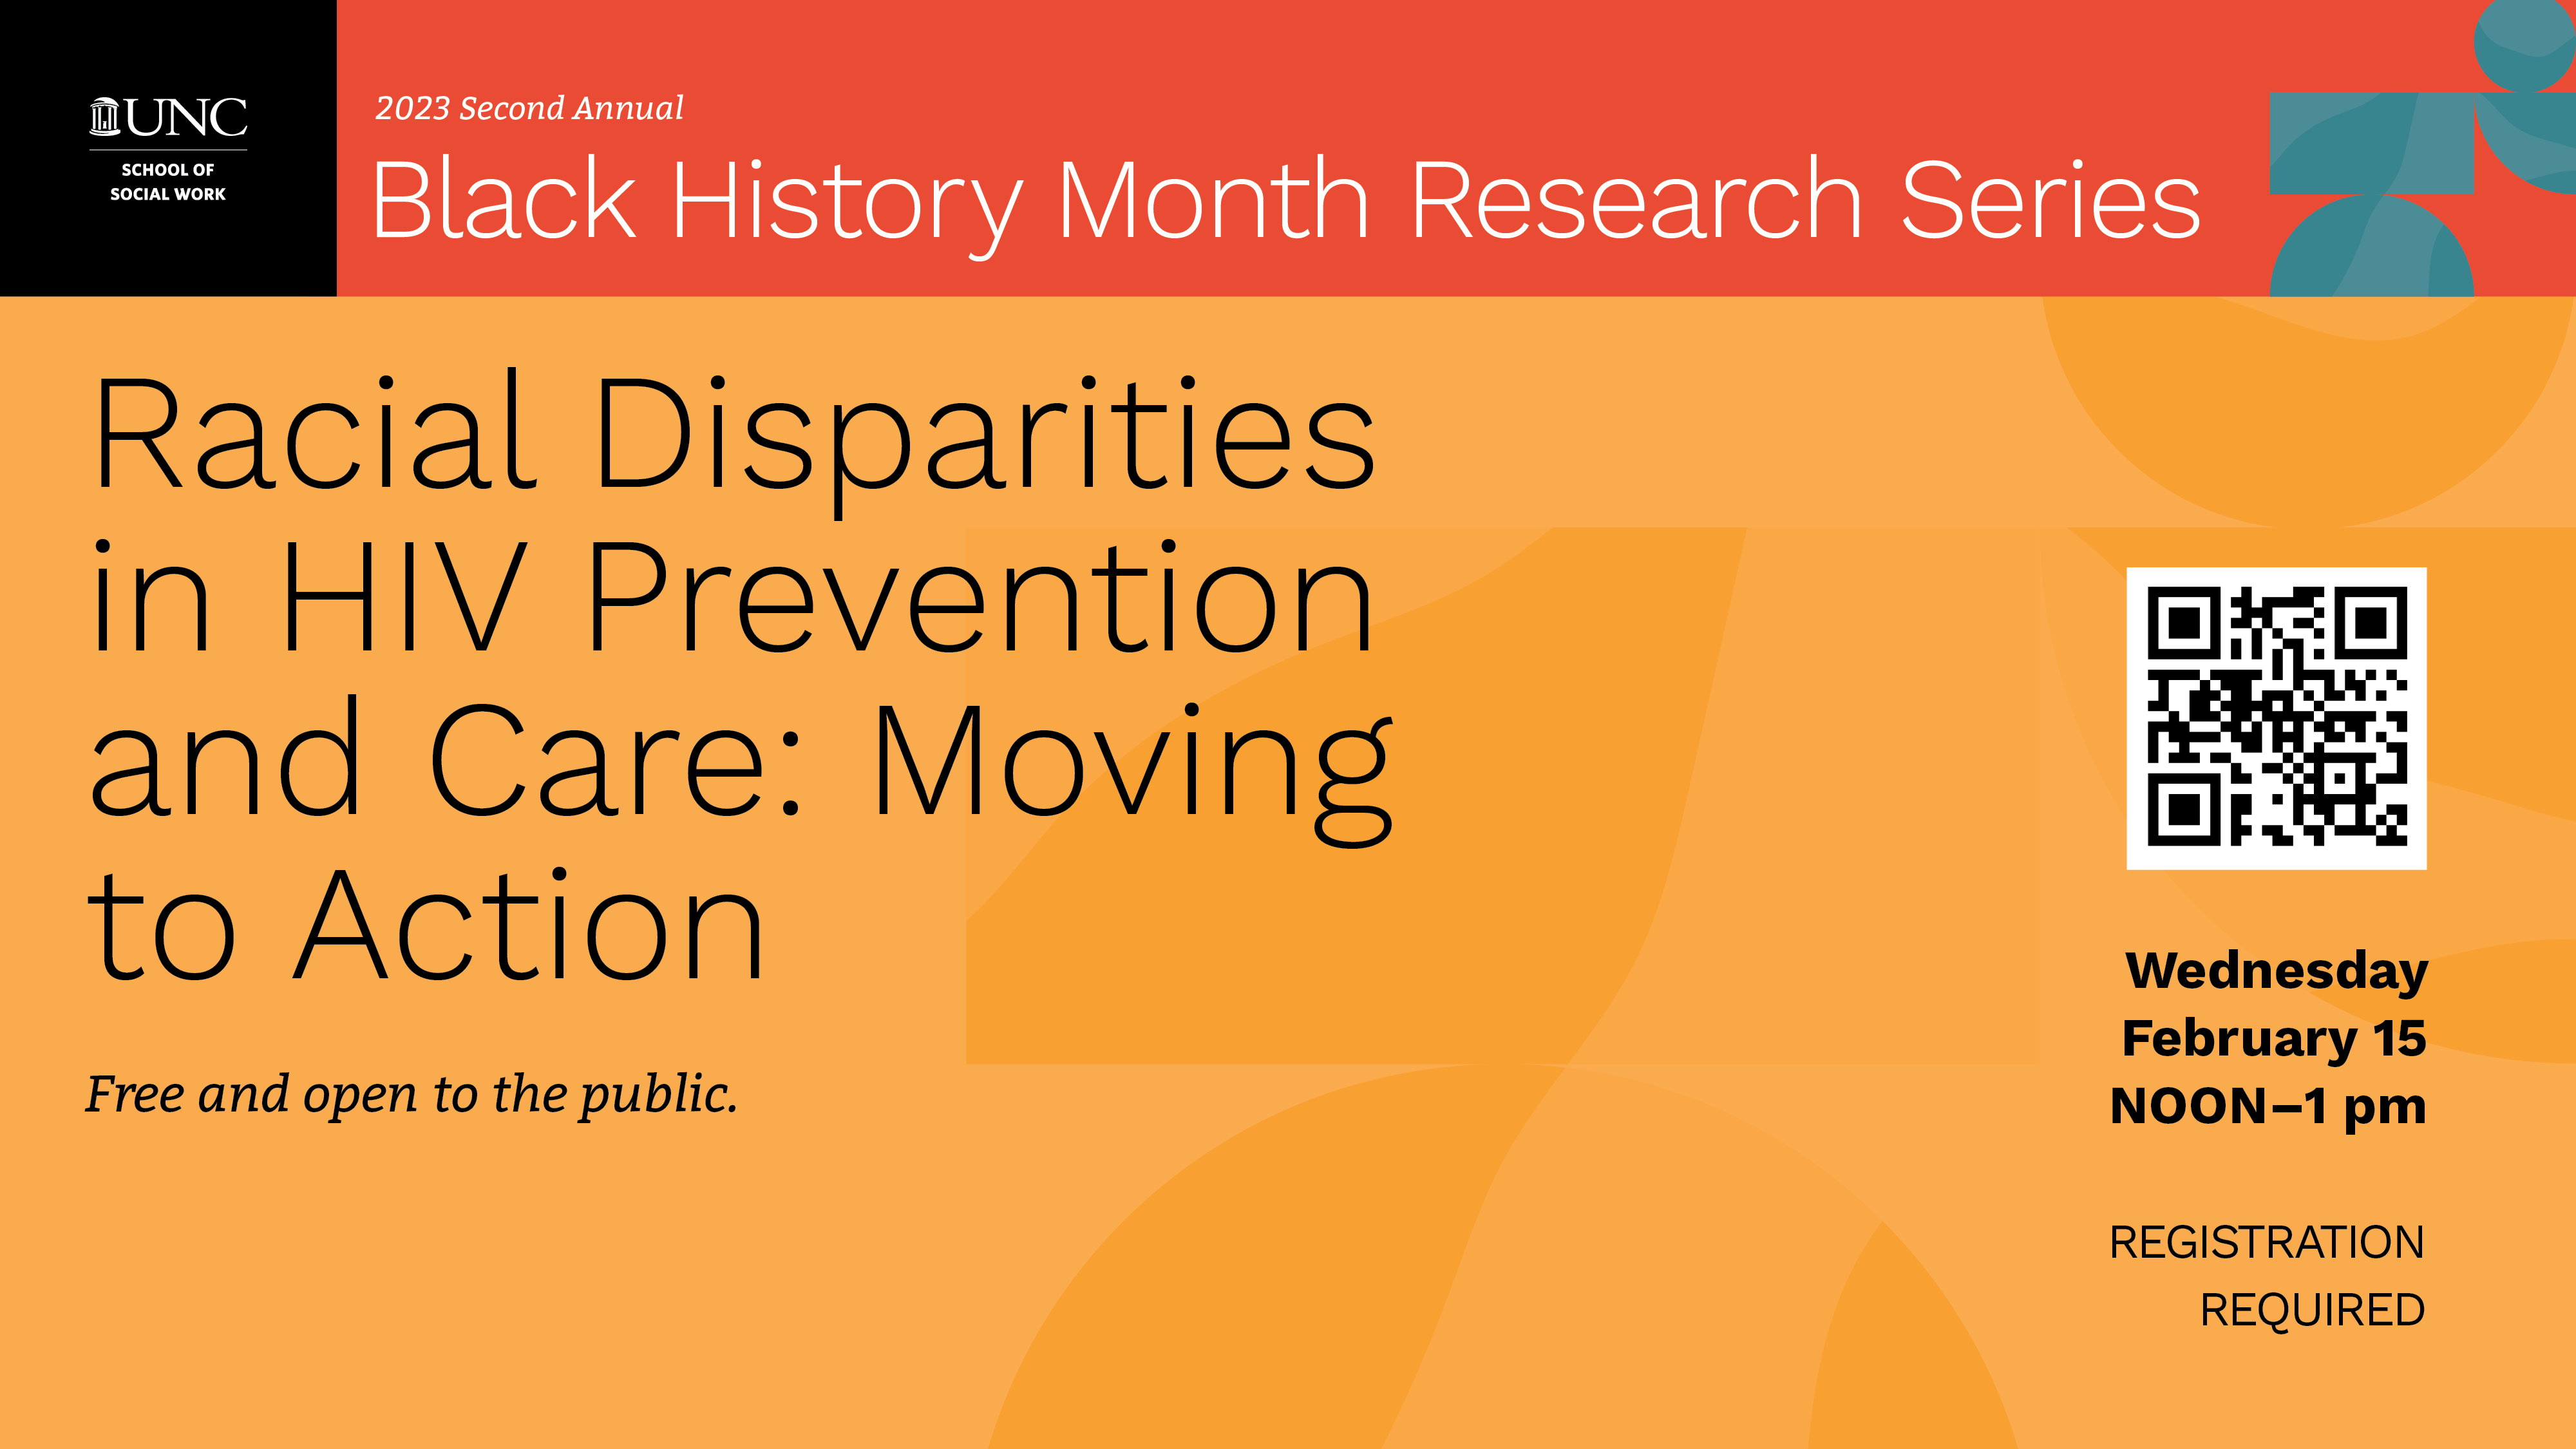 Racial Disparities in HIV Prevention and Care: Moving to Action